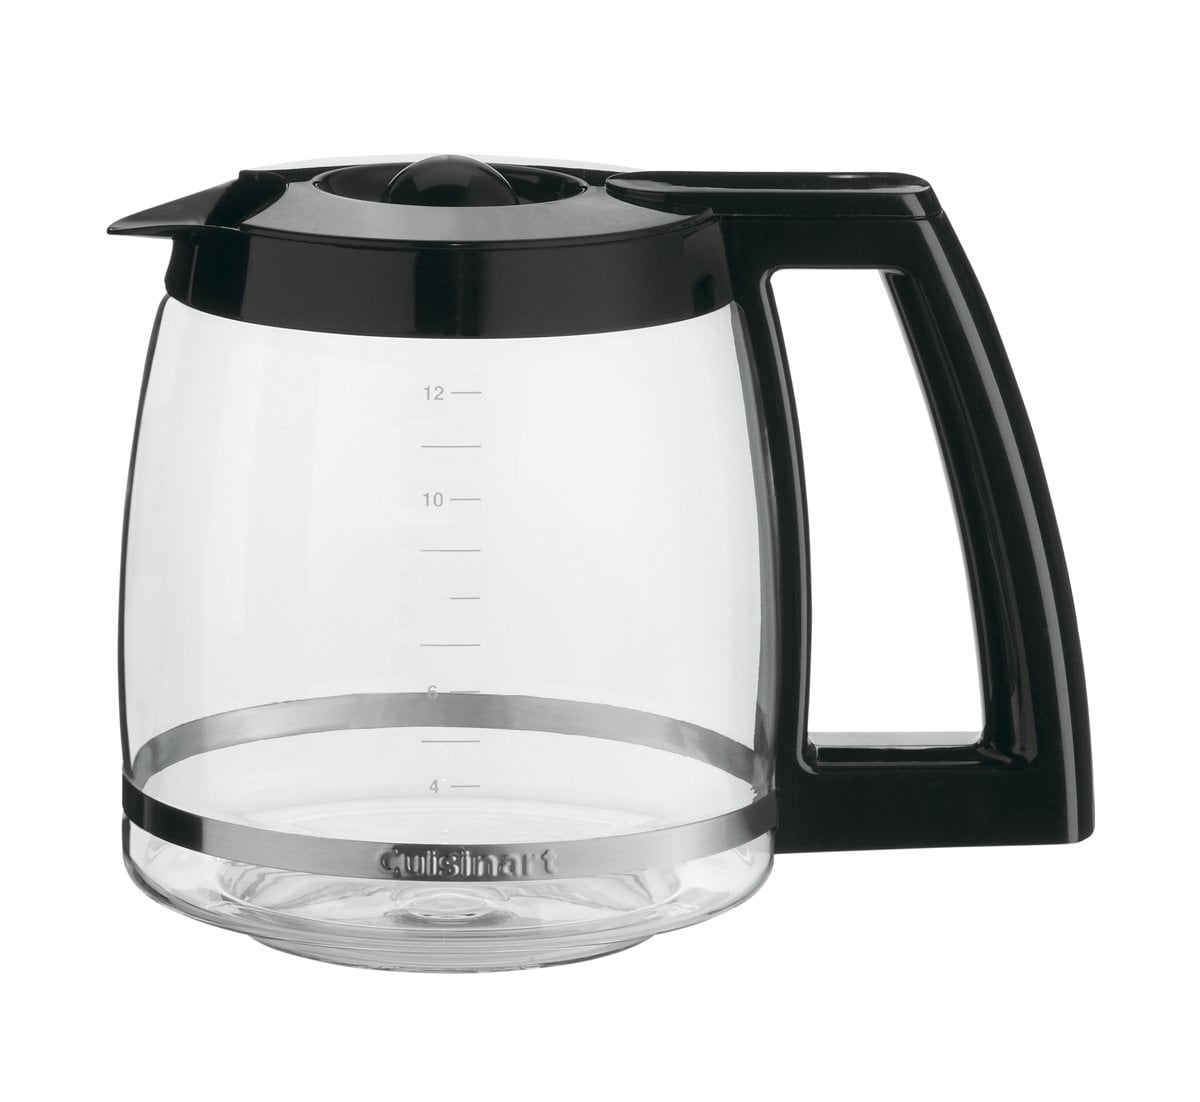 Cuisinart pro 220 volts Bean to cup coffee maker with insulated carafe jug  built in burr grinder 220v 240 volt 50 hz